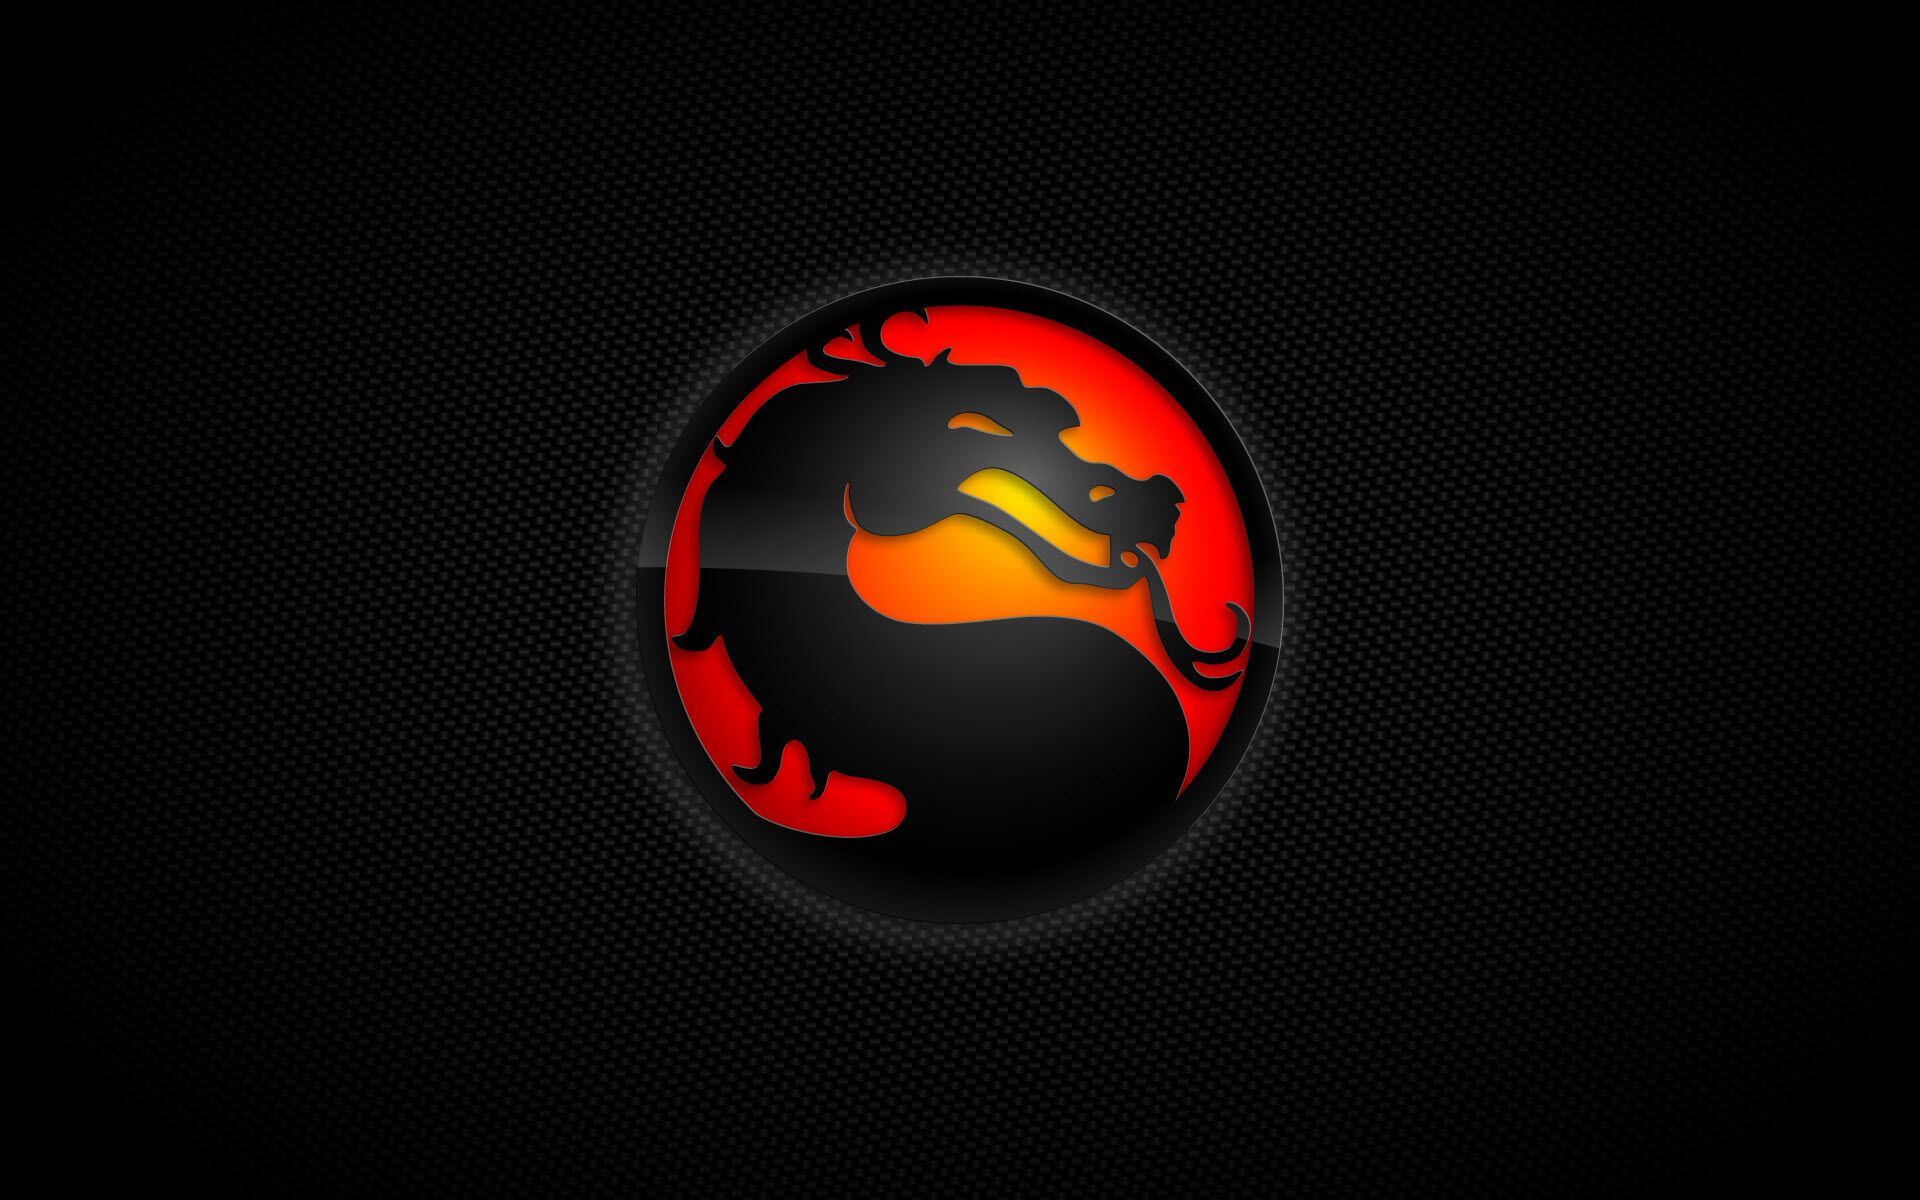 New Actress Has Been Added to The Mortal Kombat Movie Page